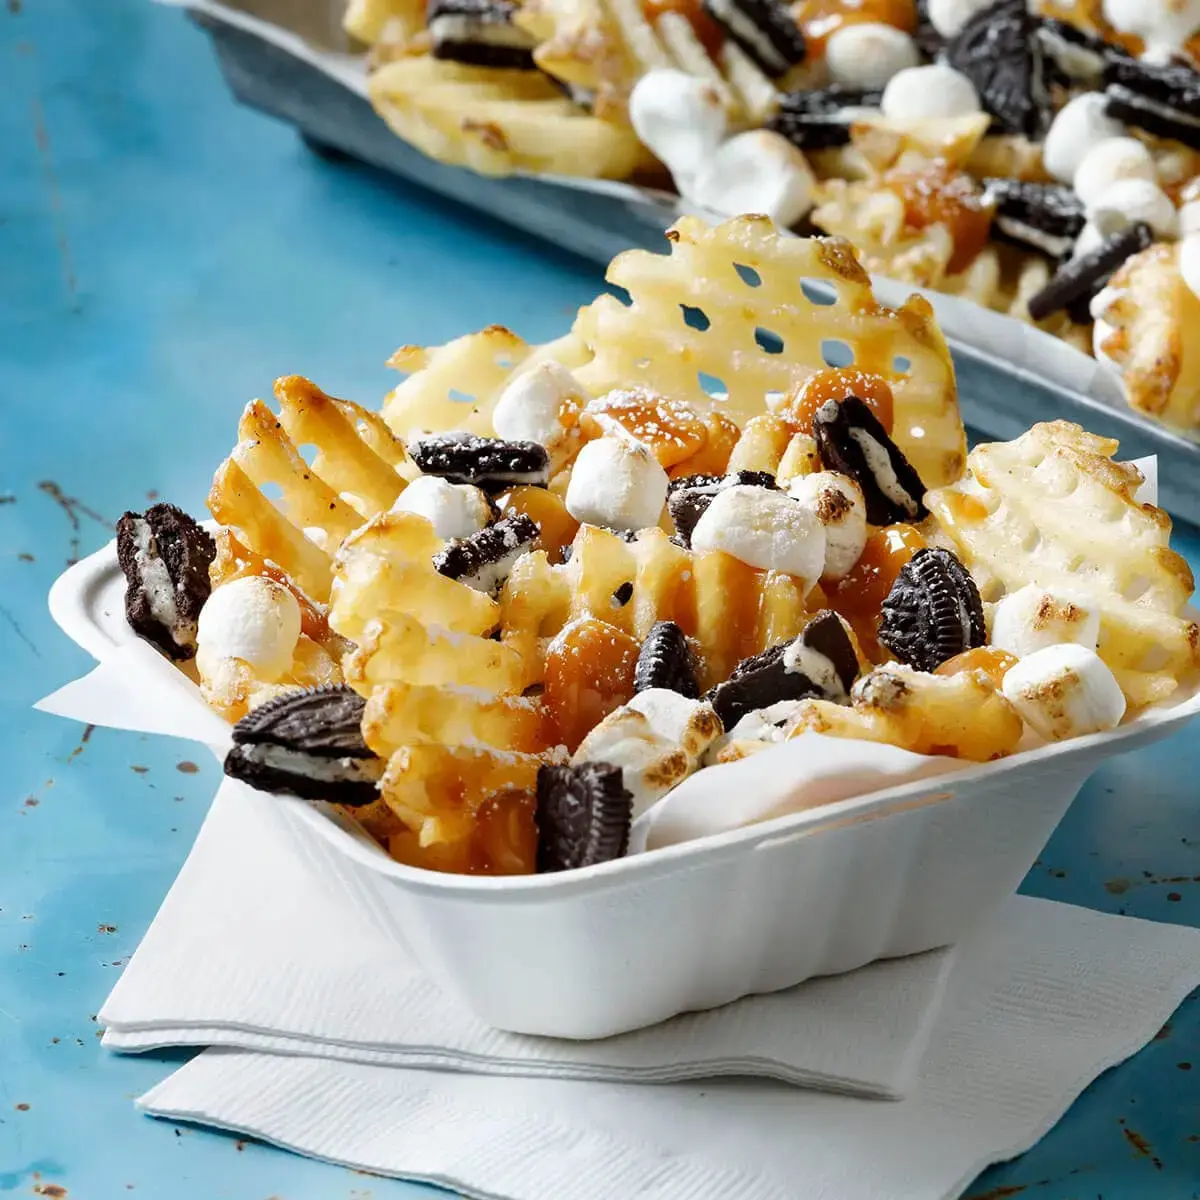 Fries and Oreo Cookie Skillet Recipe Card